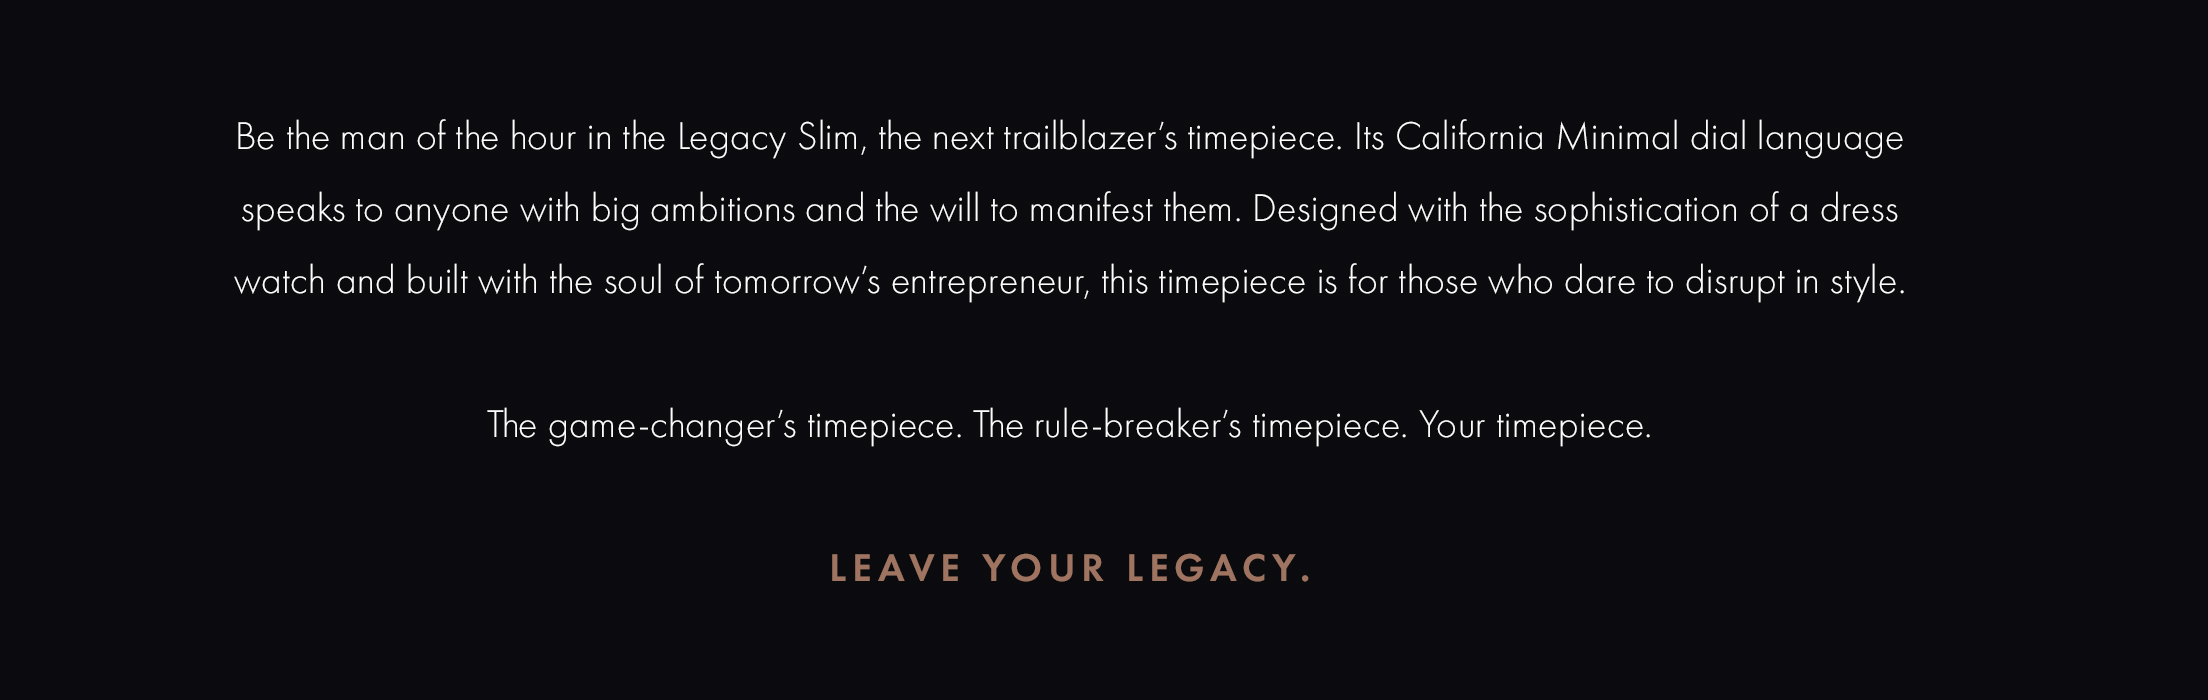 Be the man of the hour in the Legacy Slim, the next trailblazer's timepiece. Its California Minimal dial language speaks to anyone with big ambitions and all the will to manifest them. Designed with the sophistication of a dress watch and built with the soul of tomorrow's entrepreneur, this timepiece is for those who dare to disrupt in style. The game-changer's timepiece. The rule-breaker's timepiece. Your timepiece. Leave Your Legacy.